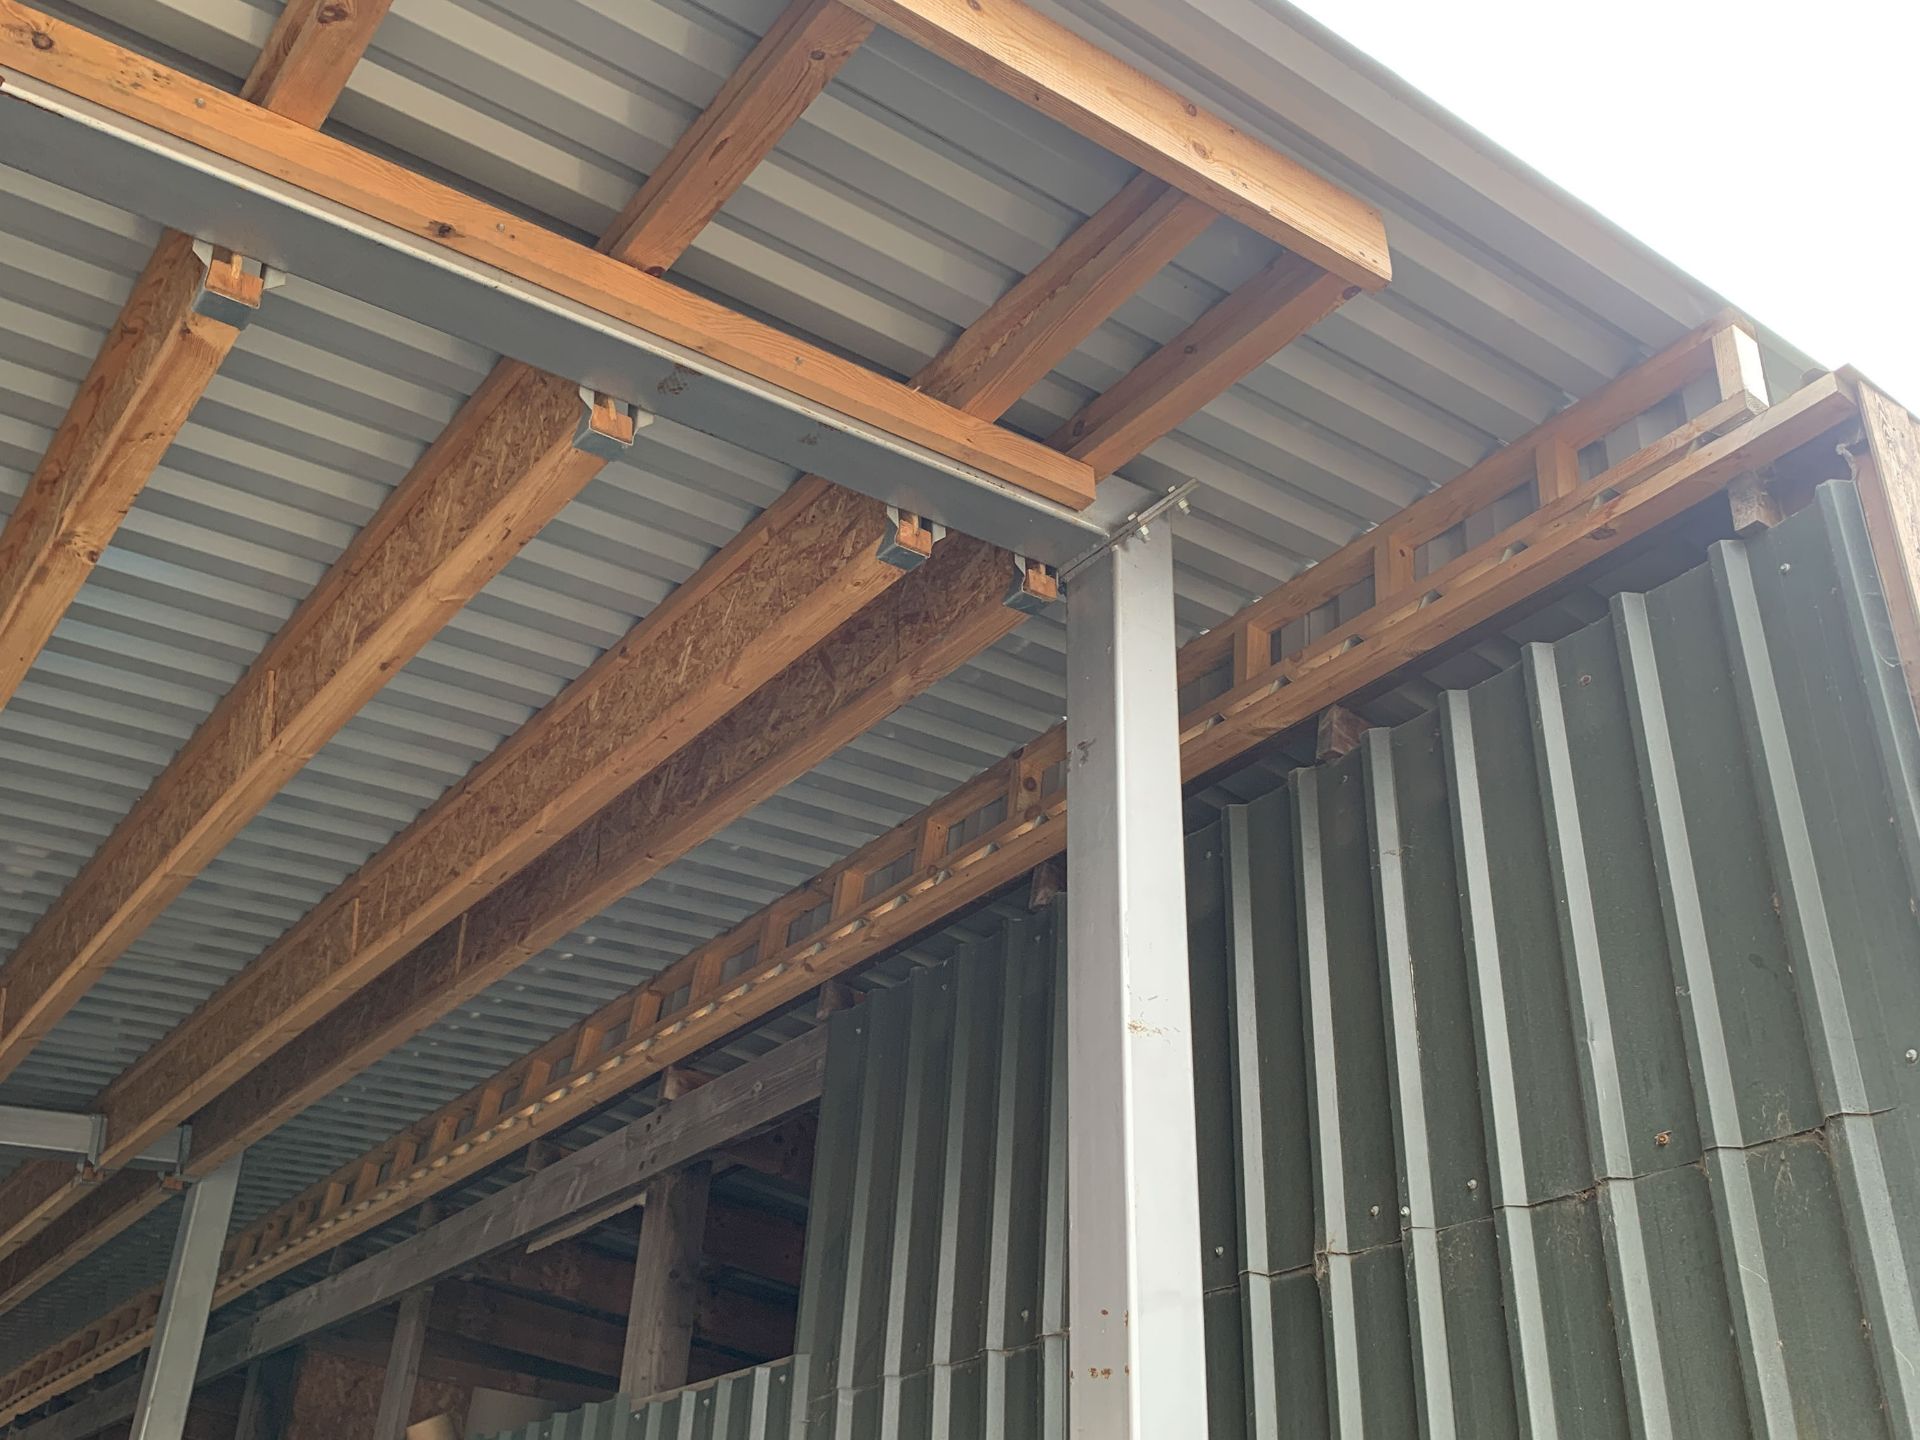 Steel Open Sided Structure with Corrugated Sloping Roof - Image 6 of 6